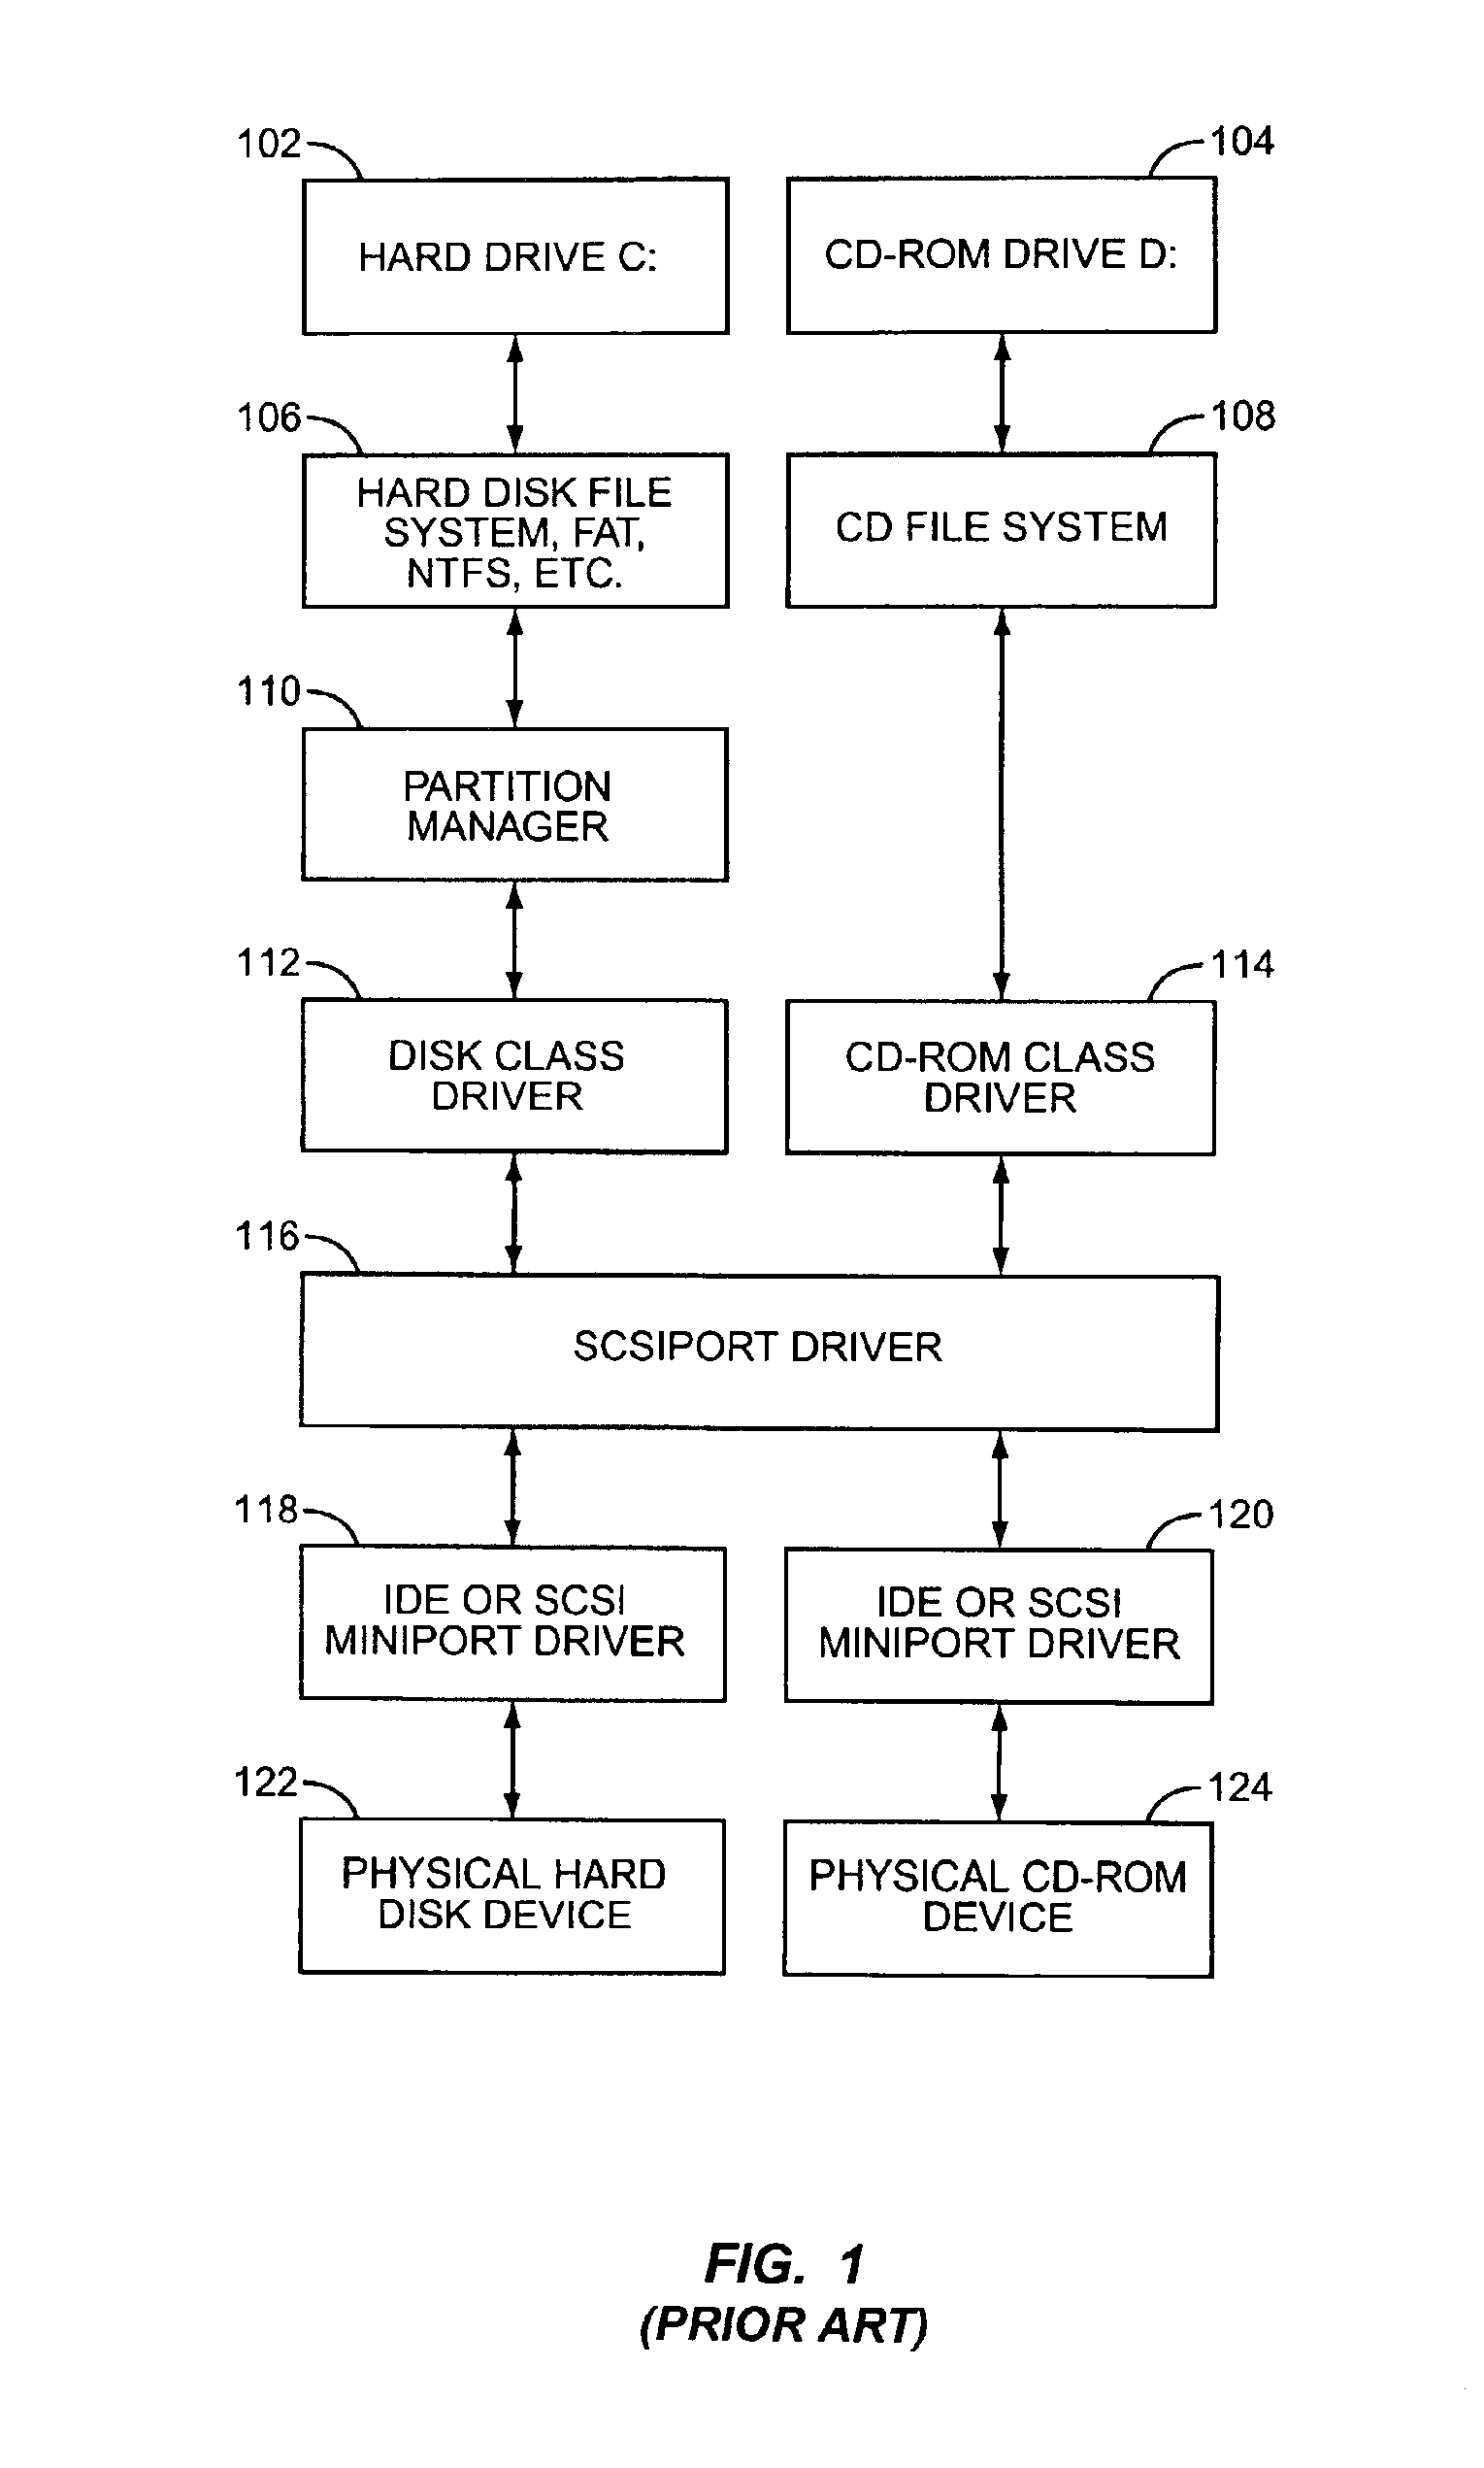 Method of altering a computer operating system to boot and run from protected media